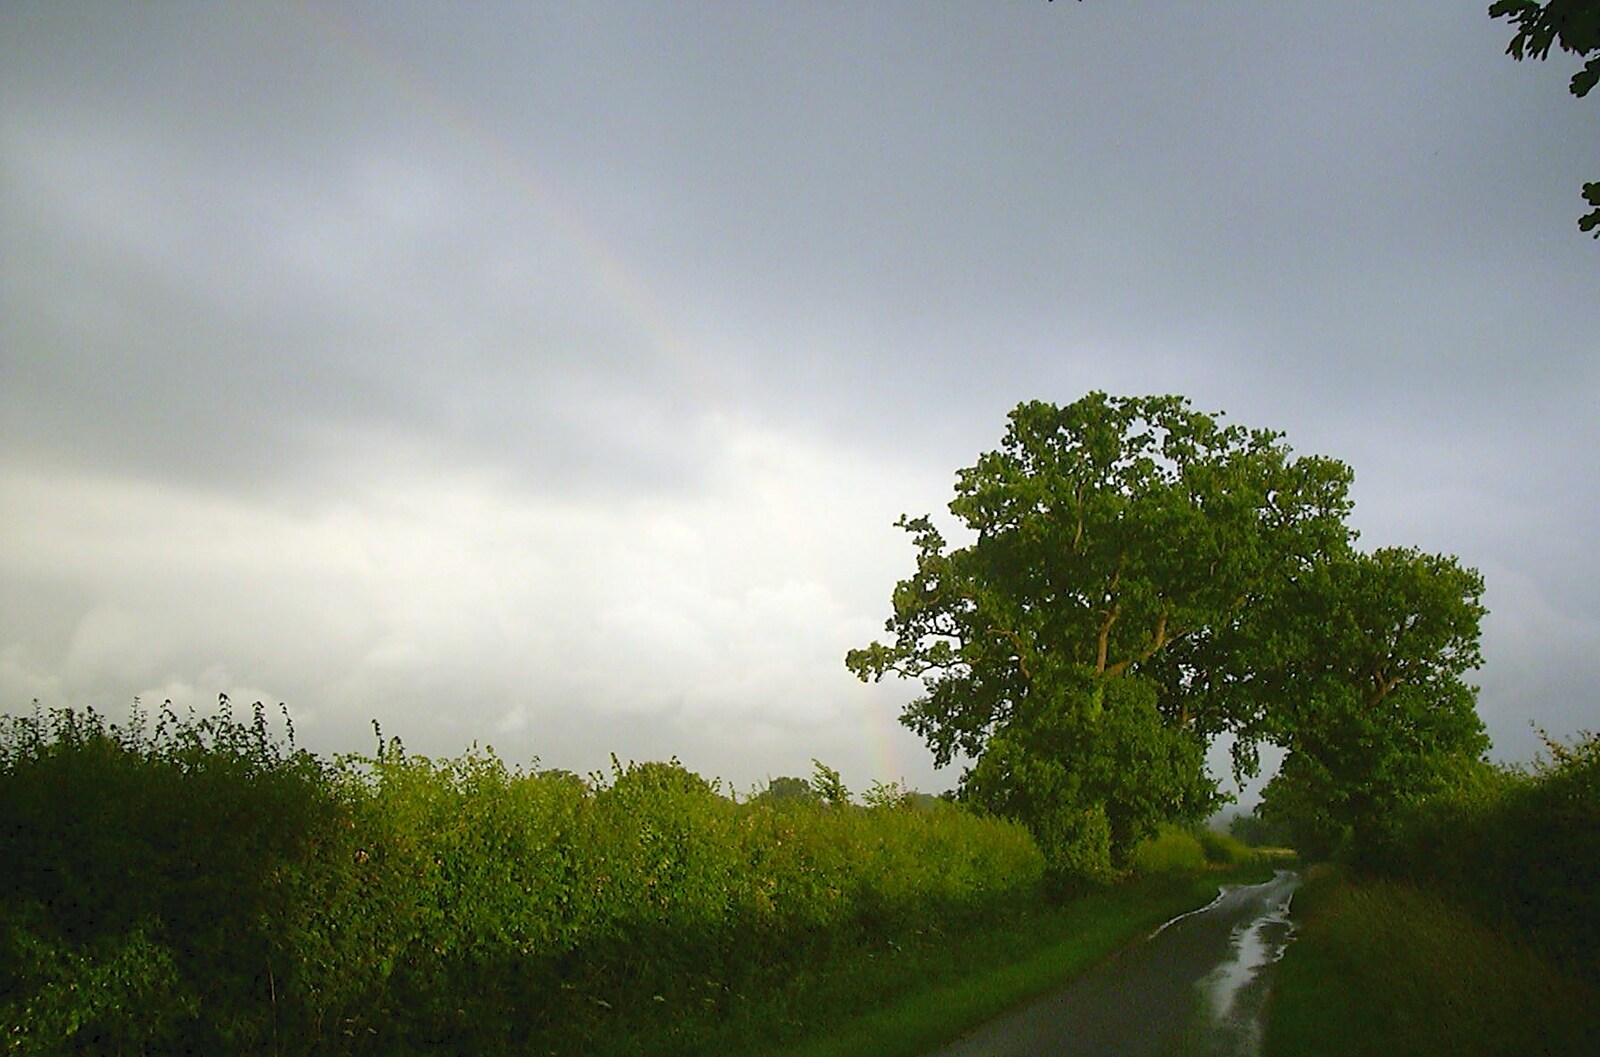 There's a faint rainbow near Billingford from The BSCC Annual Sponsored Bike Ride, The Cottage, Thorpe St. Andrew, Norwich  - 18th July 2004